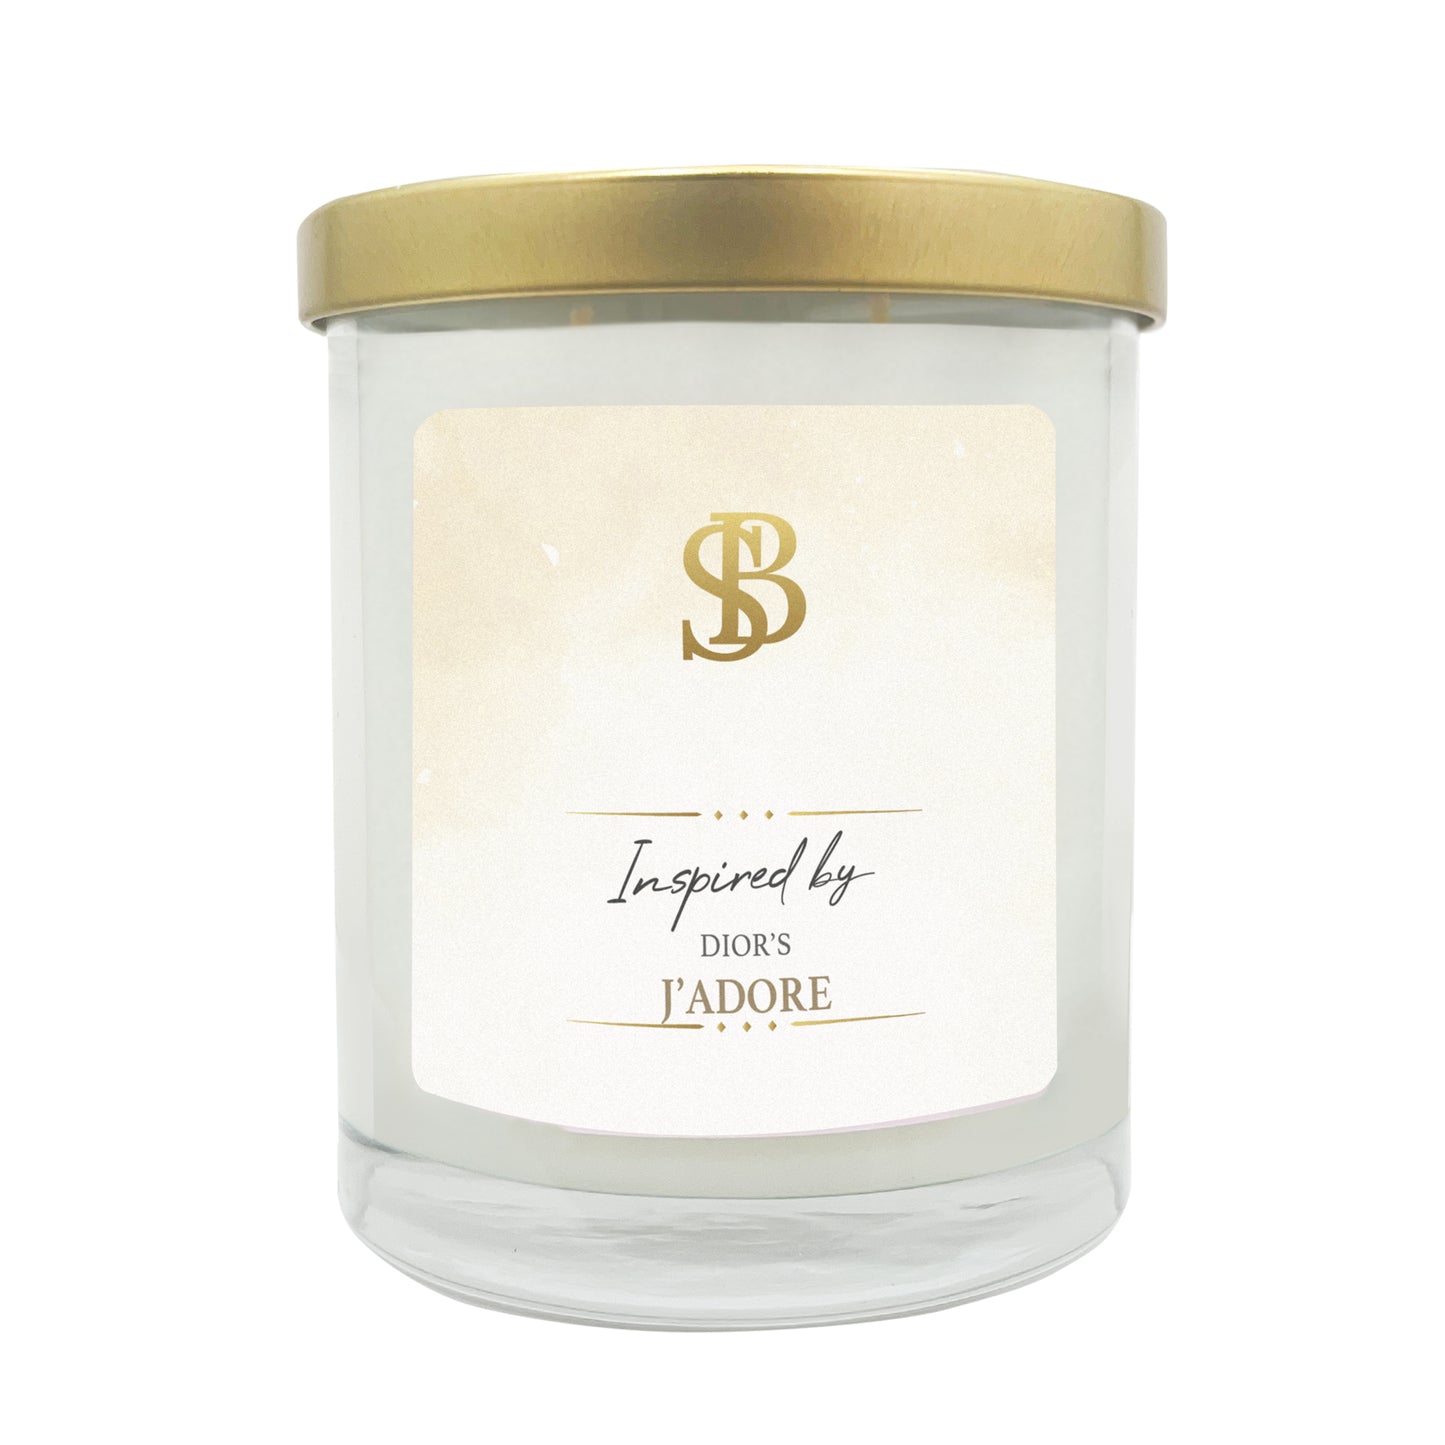 INSPIRED BY DIOR'S J'DORE | Soy Scented Candle 11 oz